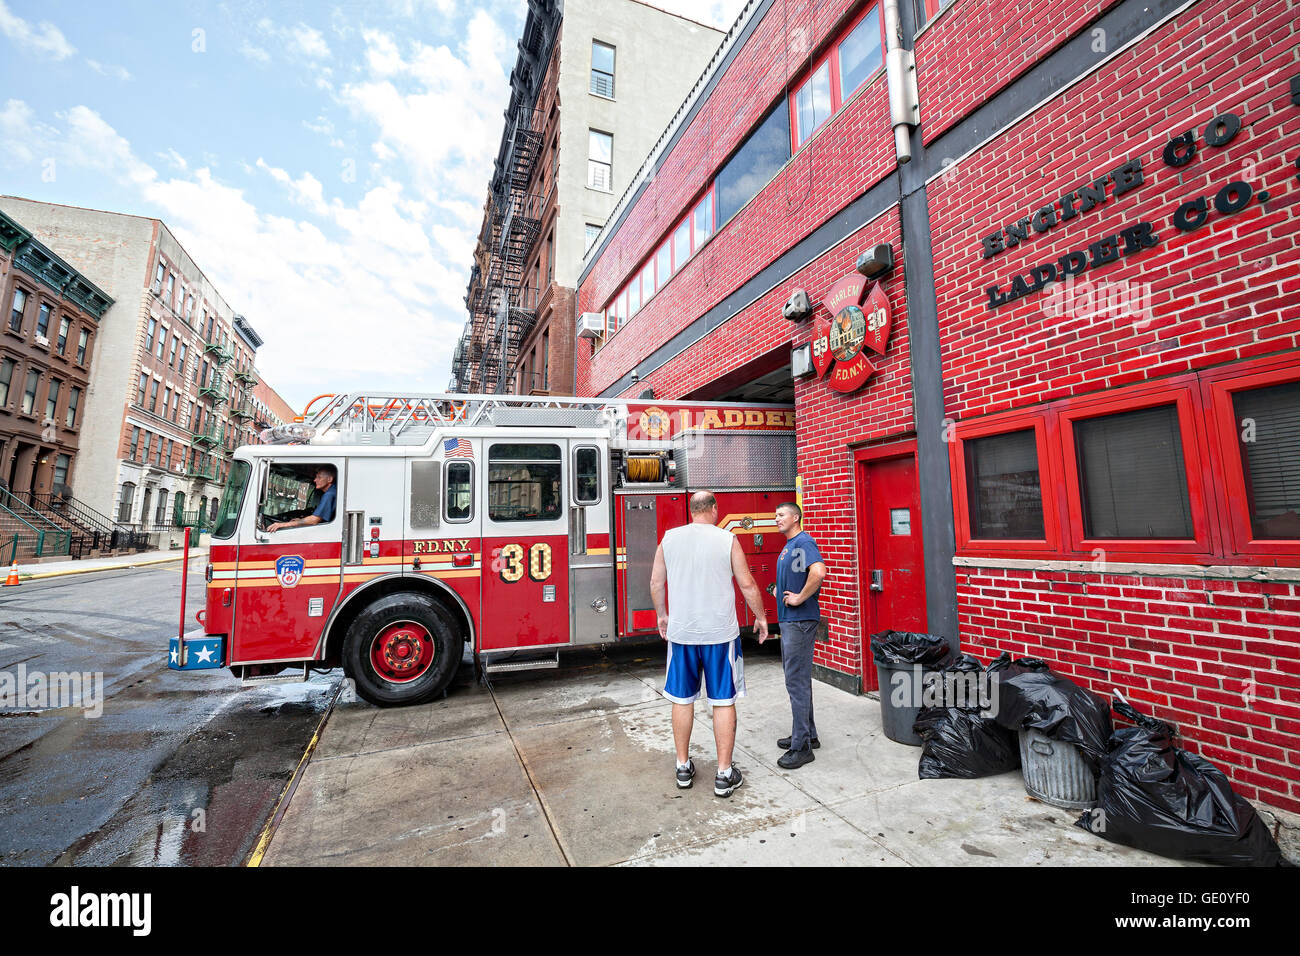 FDNY fire truck backs into garage in New York City Harlem district. Stock Photo